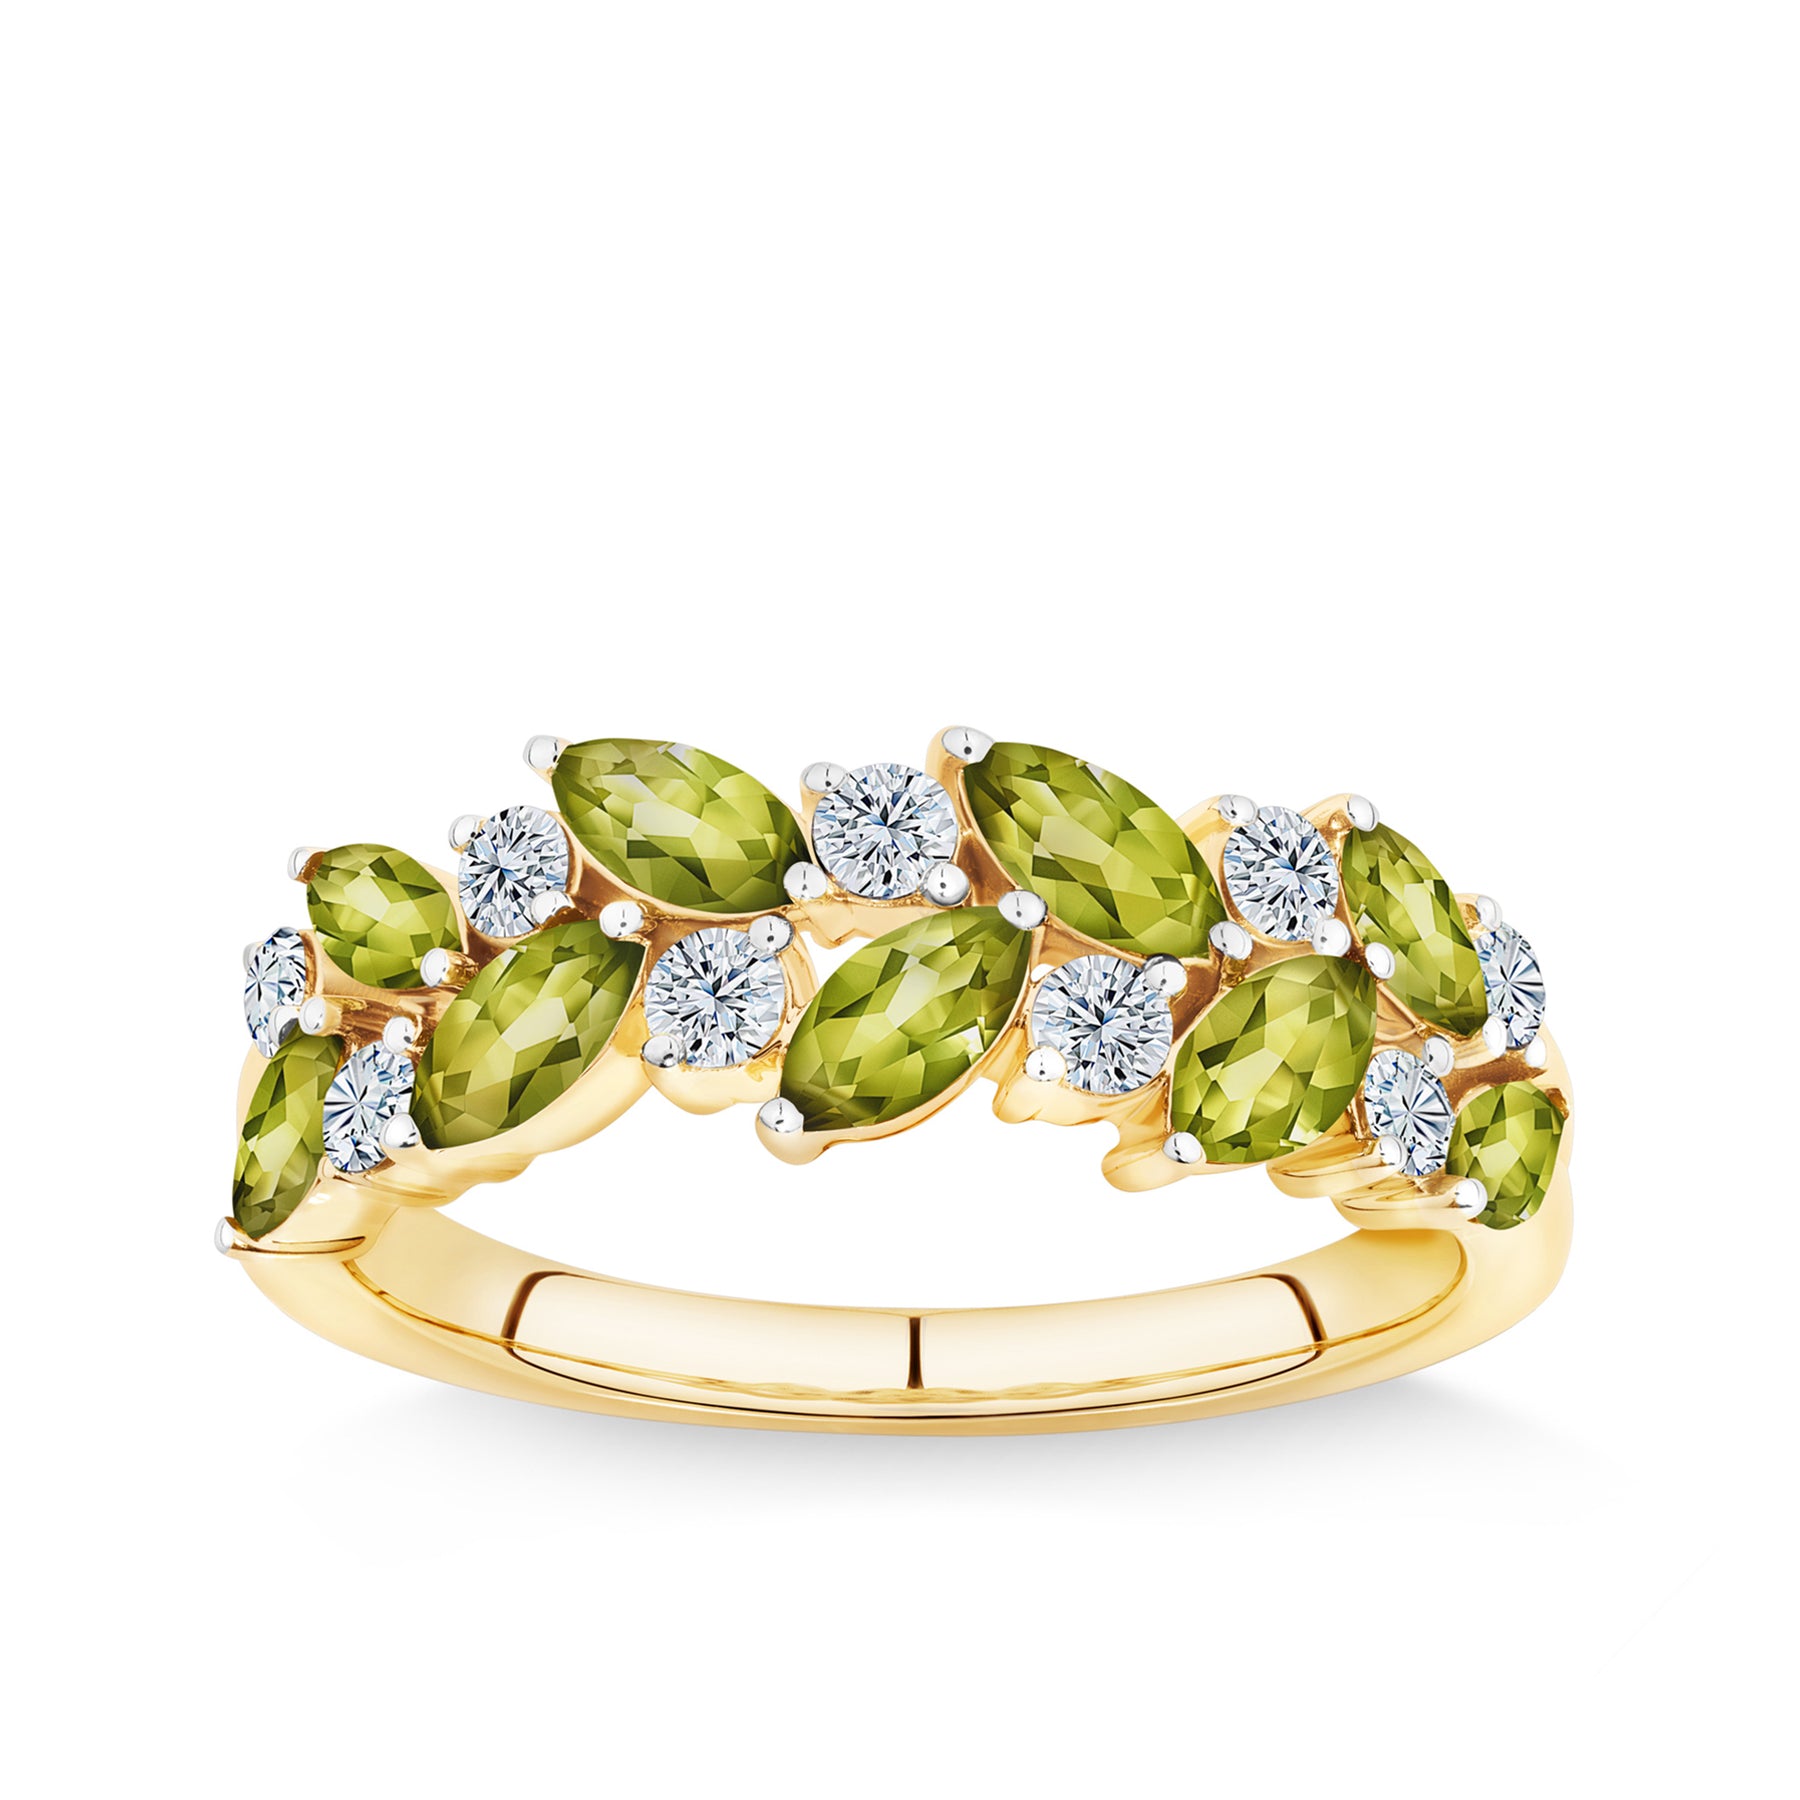 Marquise Cut Green Tourmaline & 0.30ct TW Diamond Ring in 9ct Yellow Gold